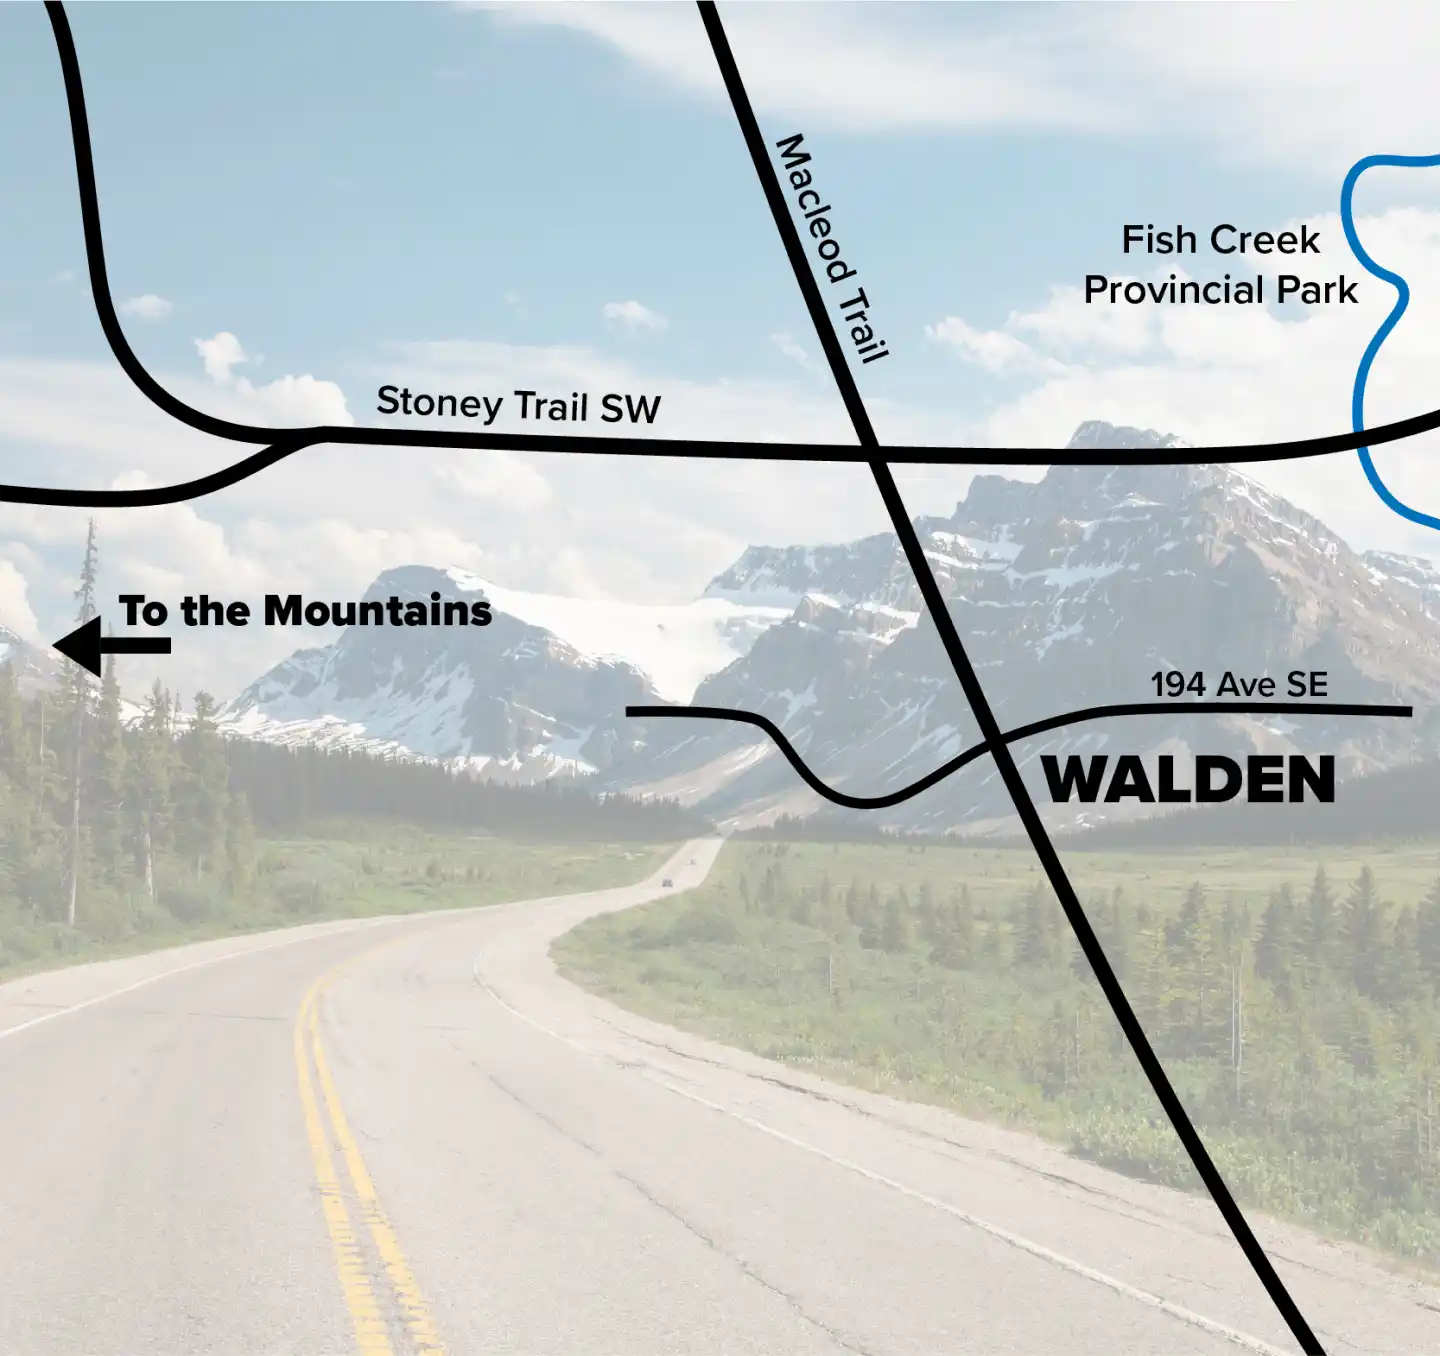 Map of Walden with the Rocky Mountains in the background